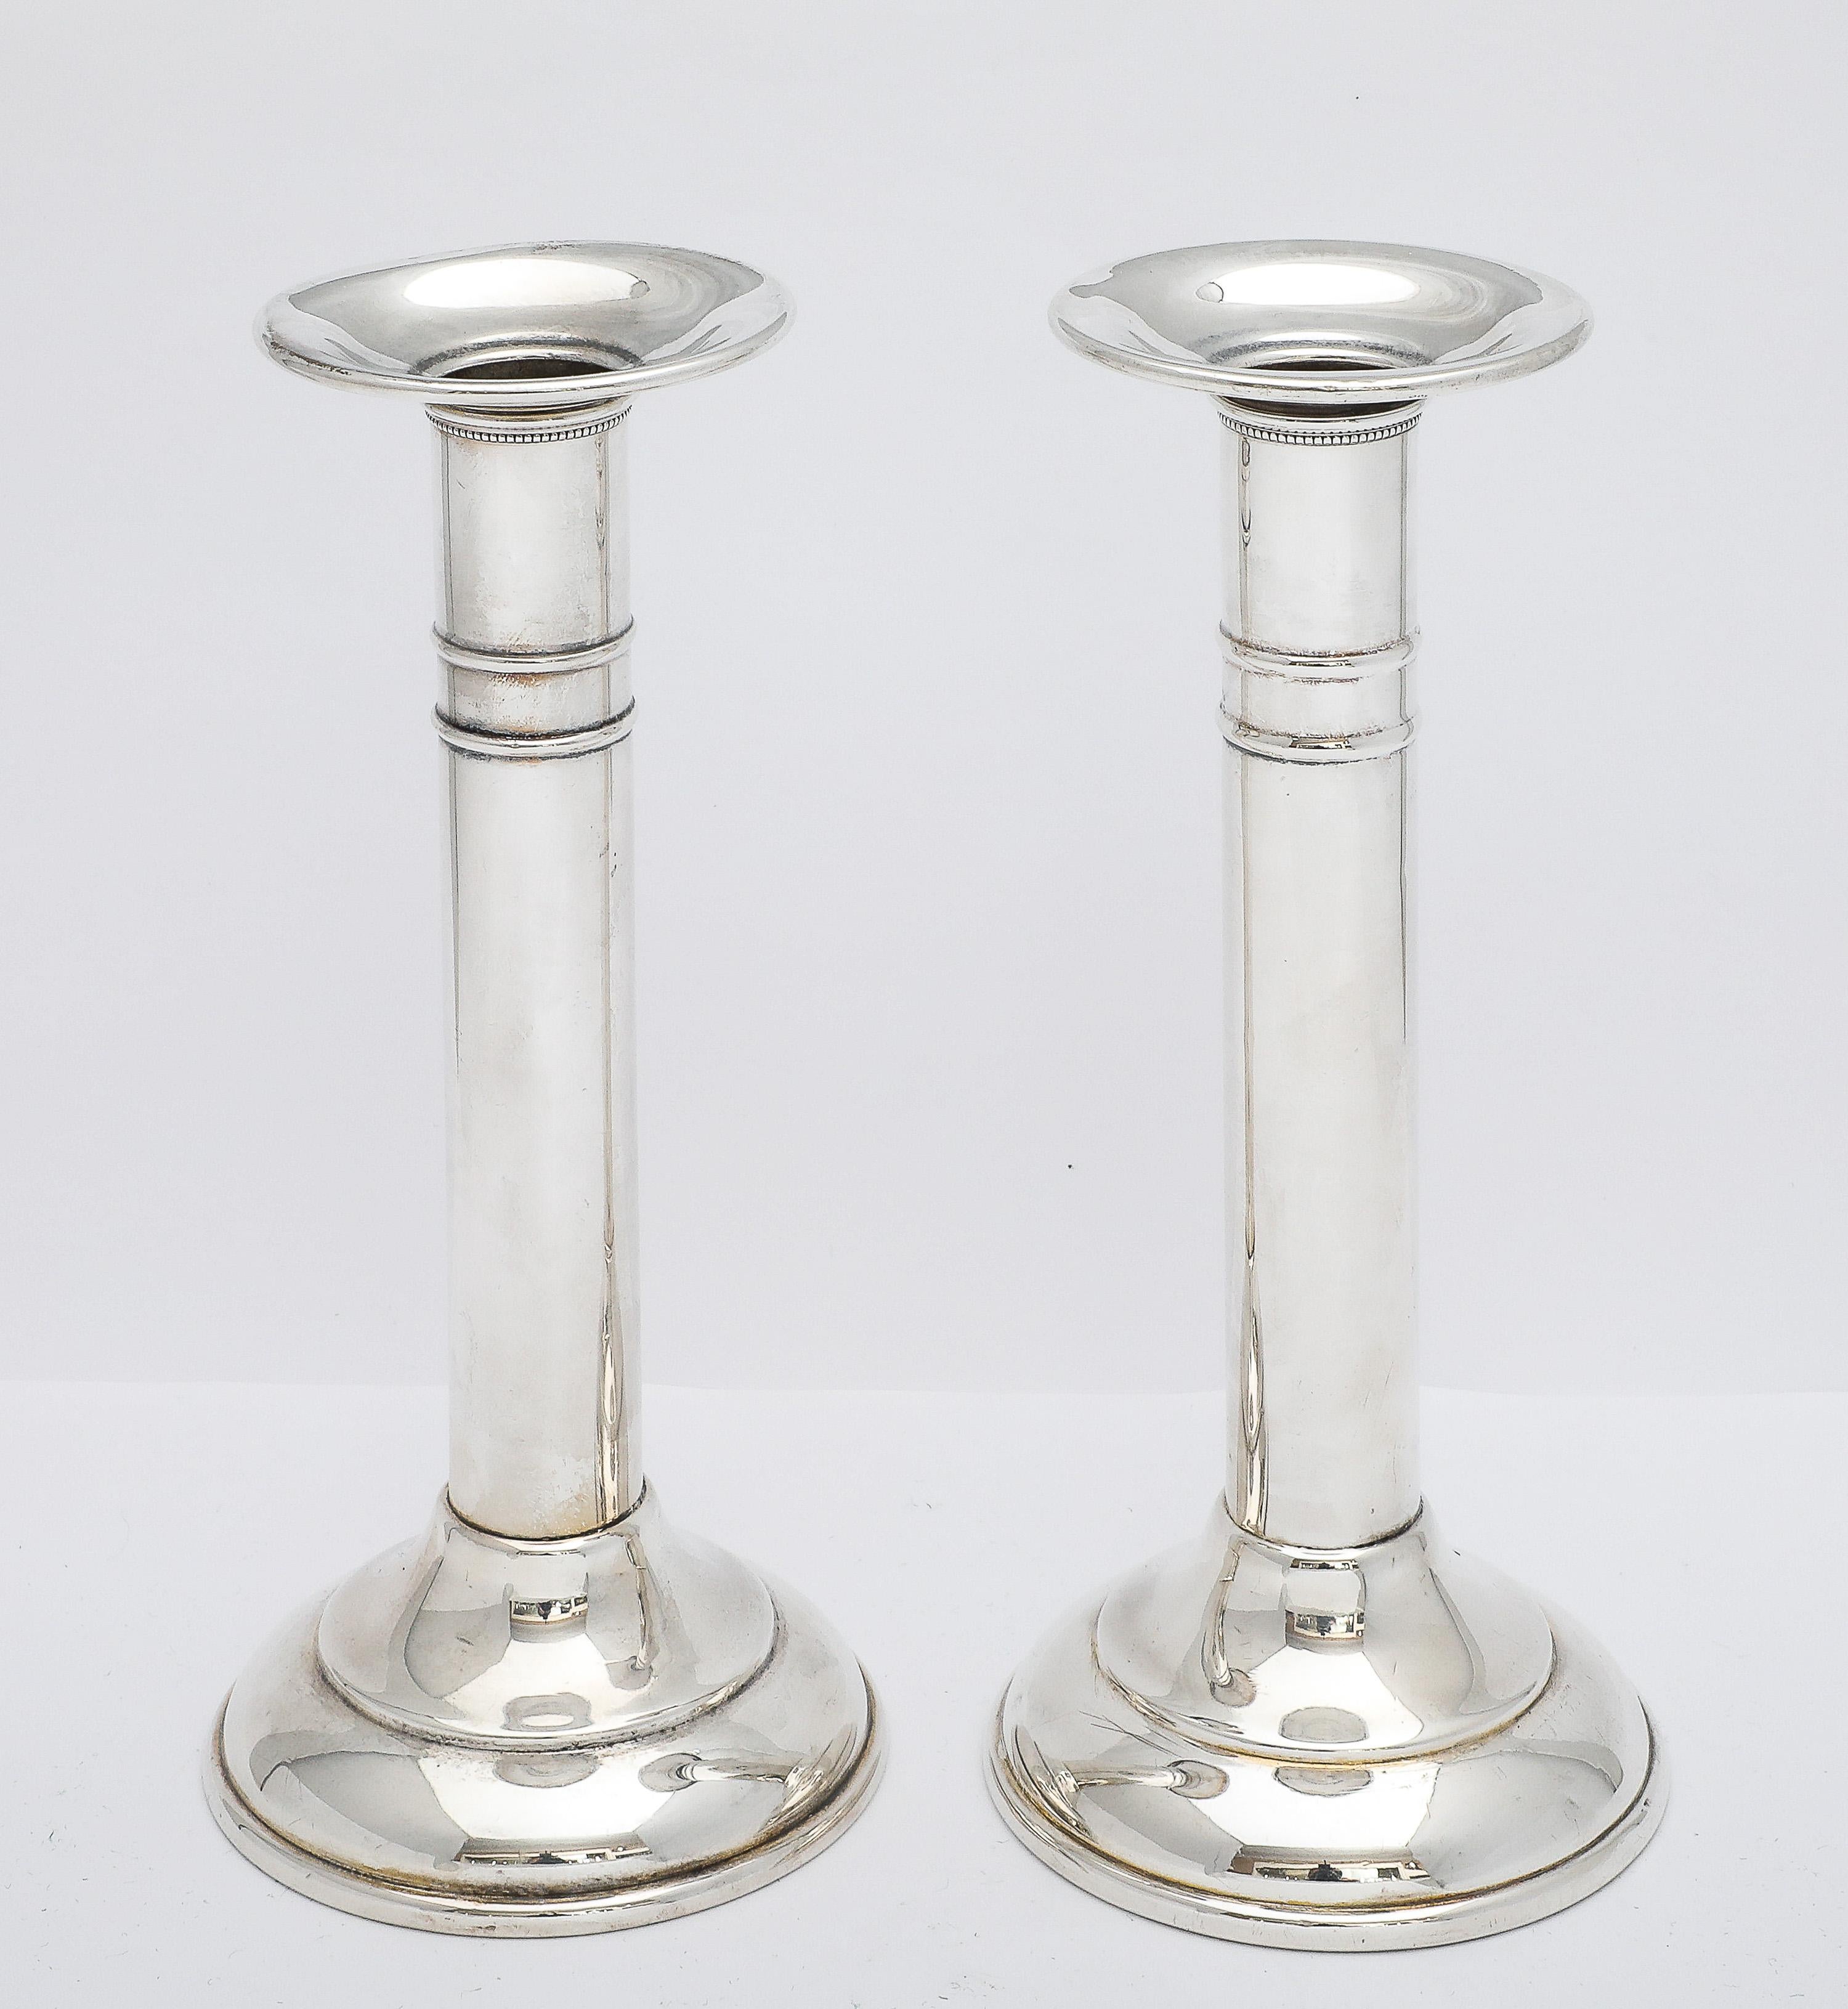 Pair of Edwardian Period Sterling Silver Candlesticks For Sale 7